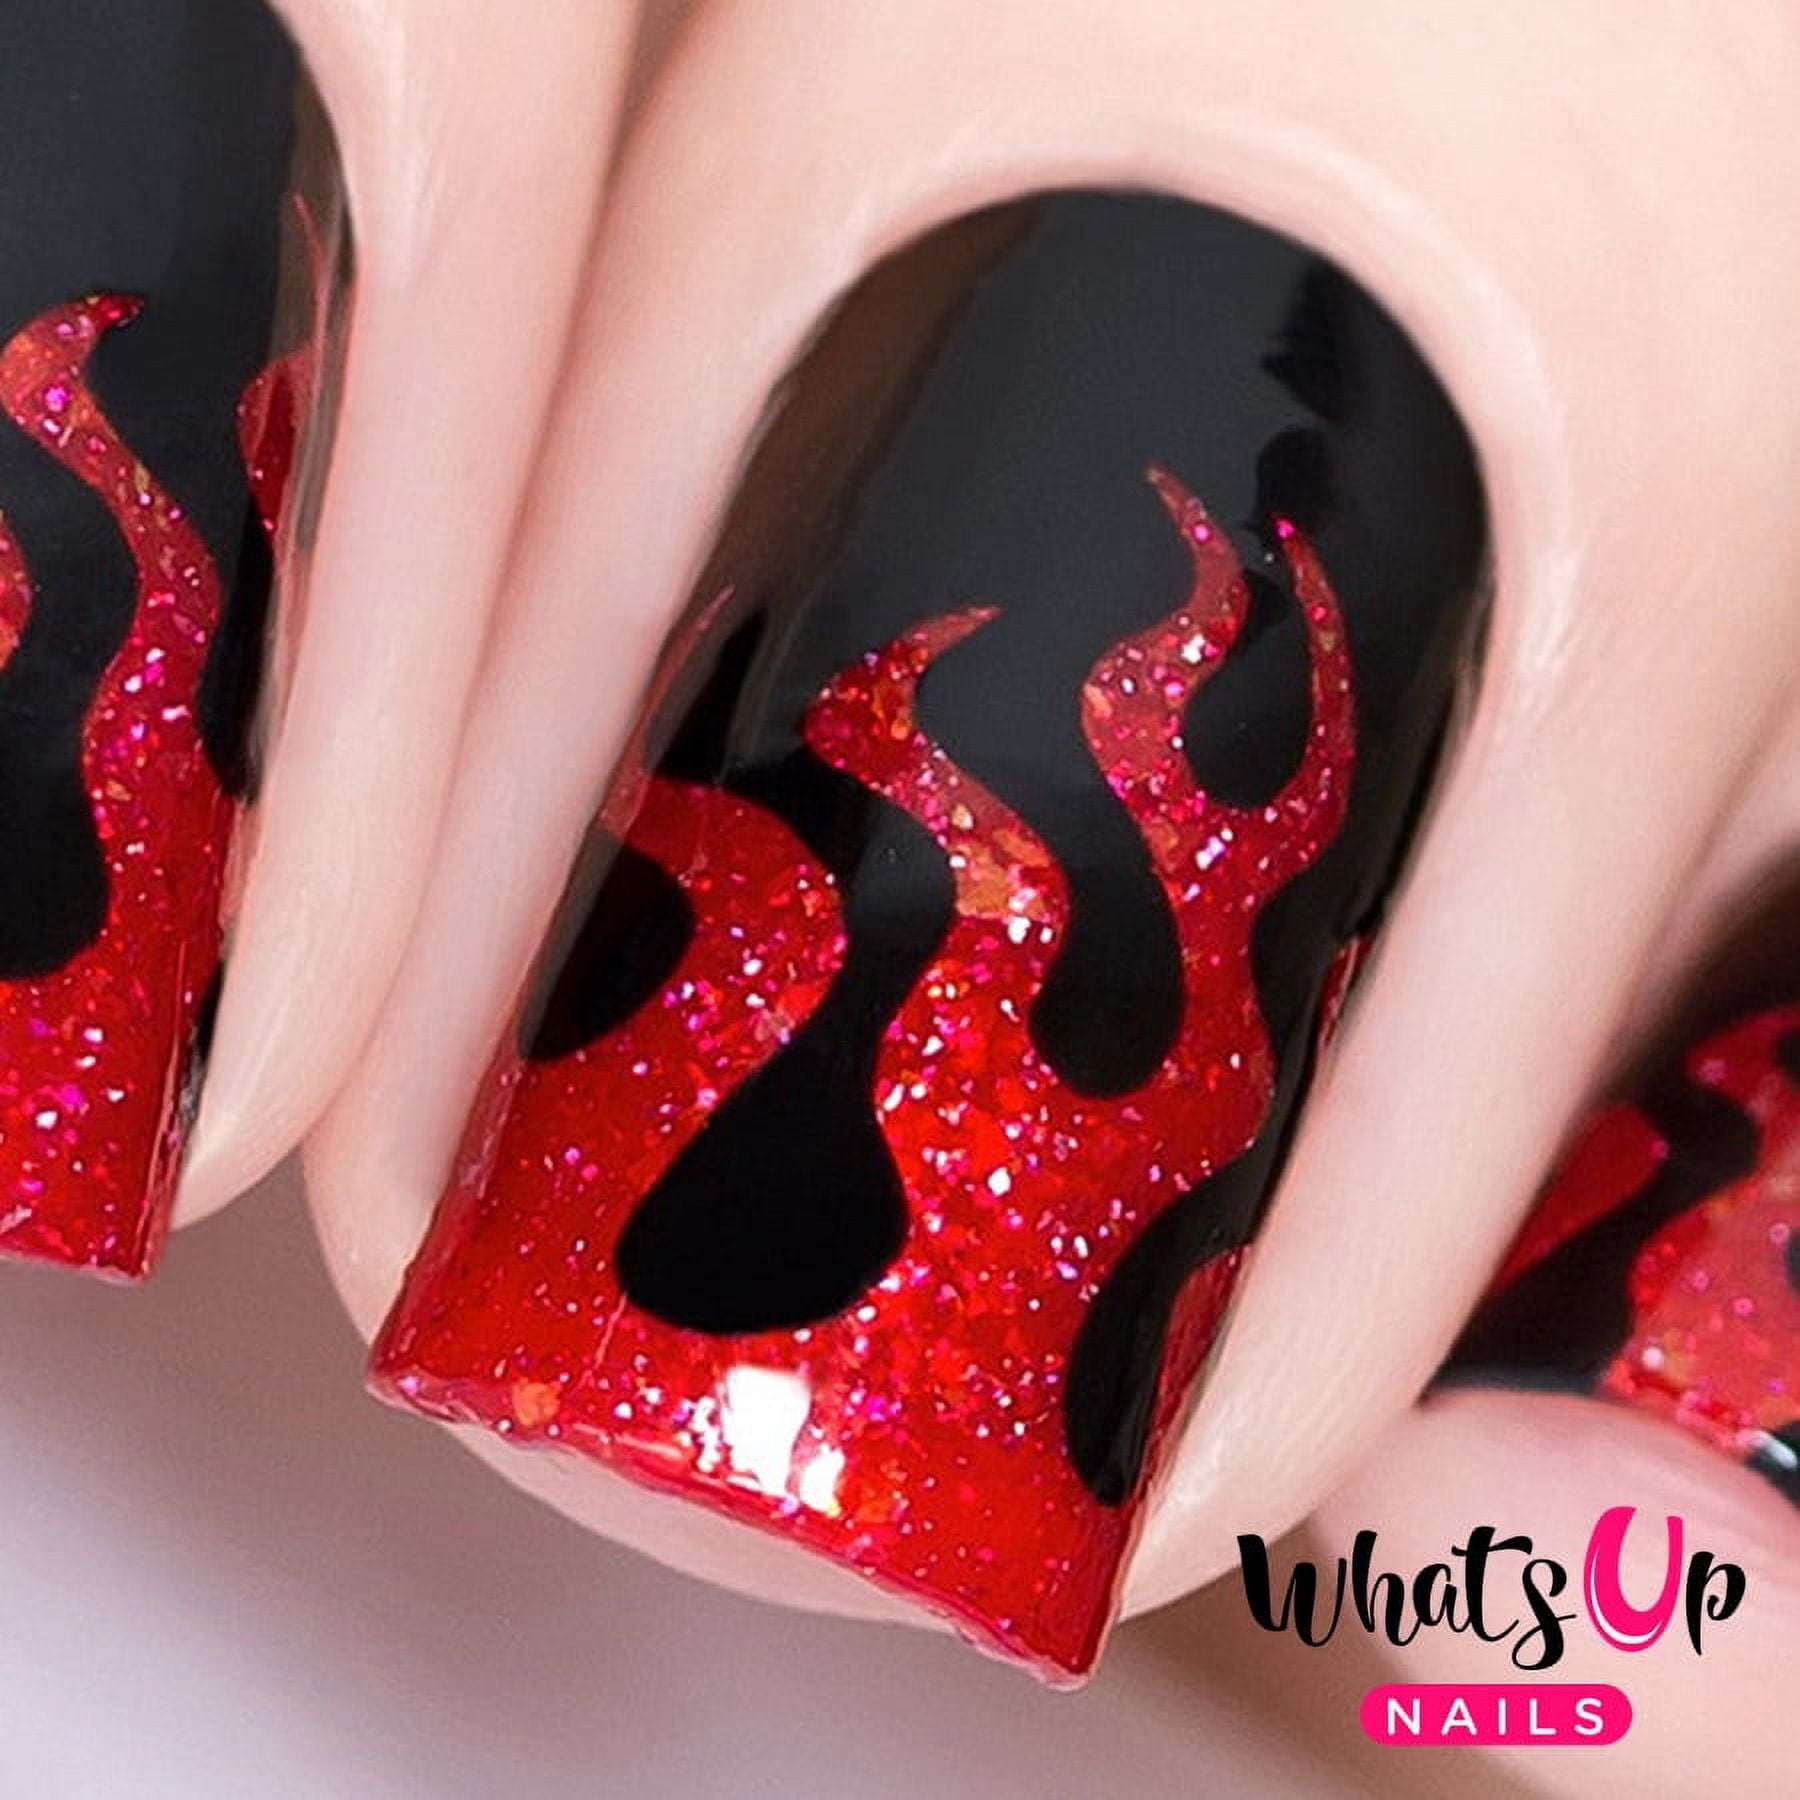 8 Flame Nails Designs To Upgrade Your Summer 2022 Nail Art